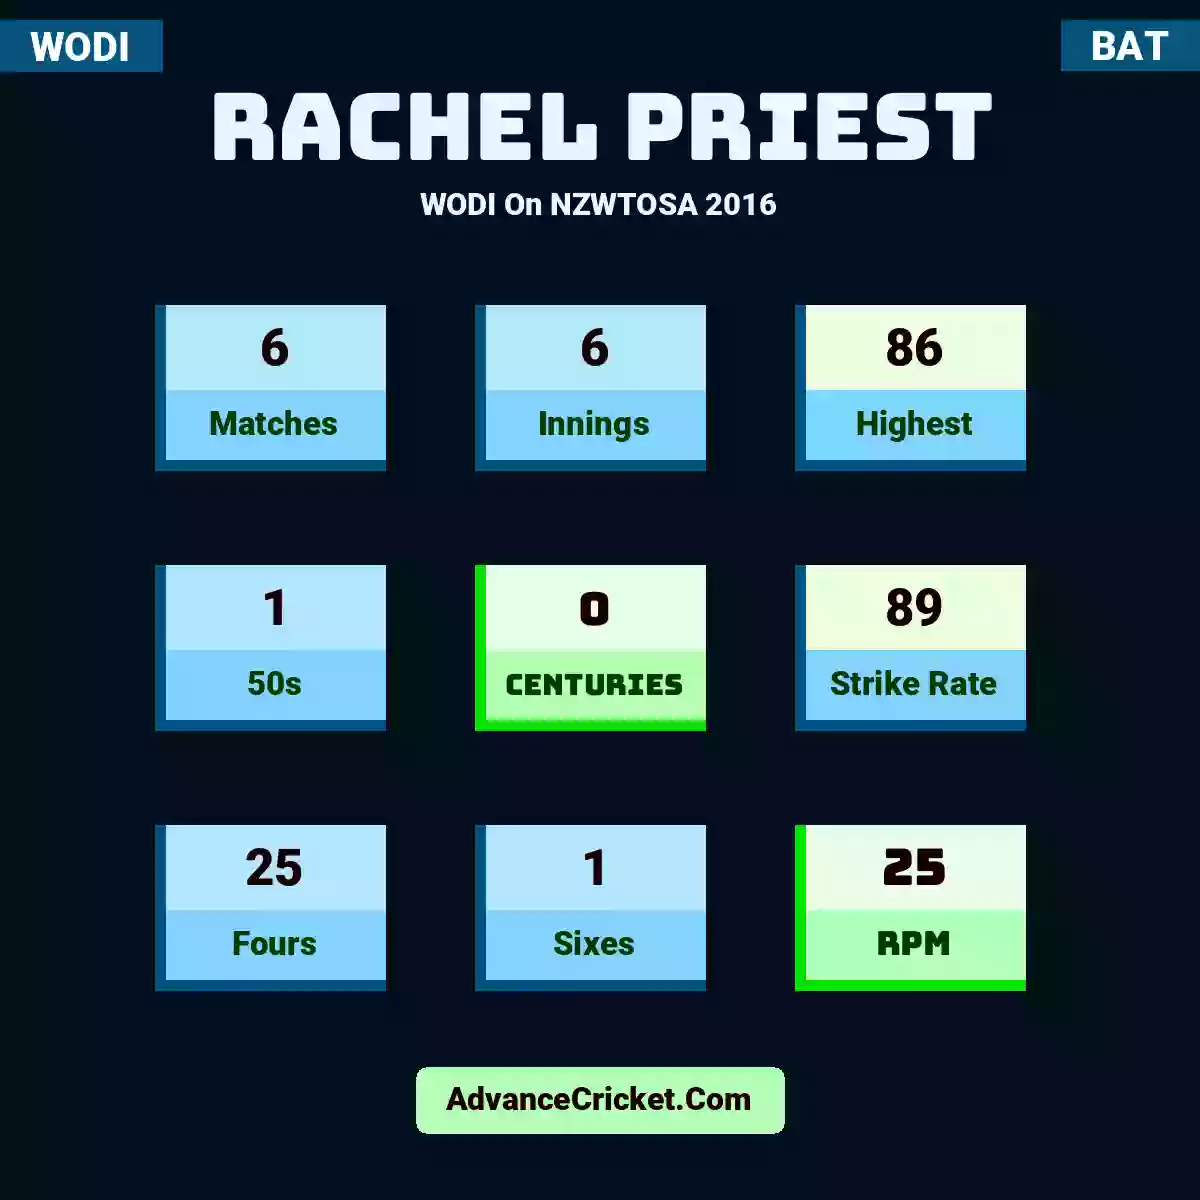 Rachel Priest WODI  On NZWTOSA 2016, Rachel Priest played 6 matches, scored 86 runs as highest, 1 half-centuries, and 0 centuries, with a strike rate of 89. R.Priest hit 25 fours and 1 sixes, with an RPM of 25.